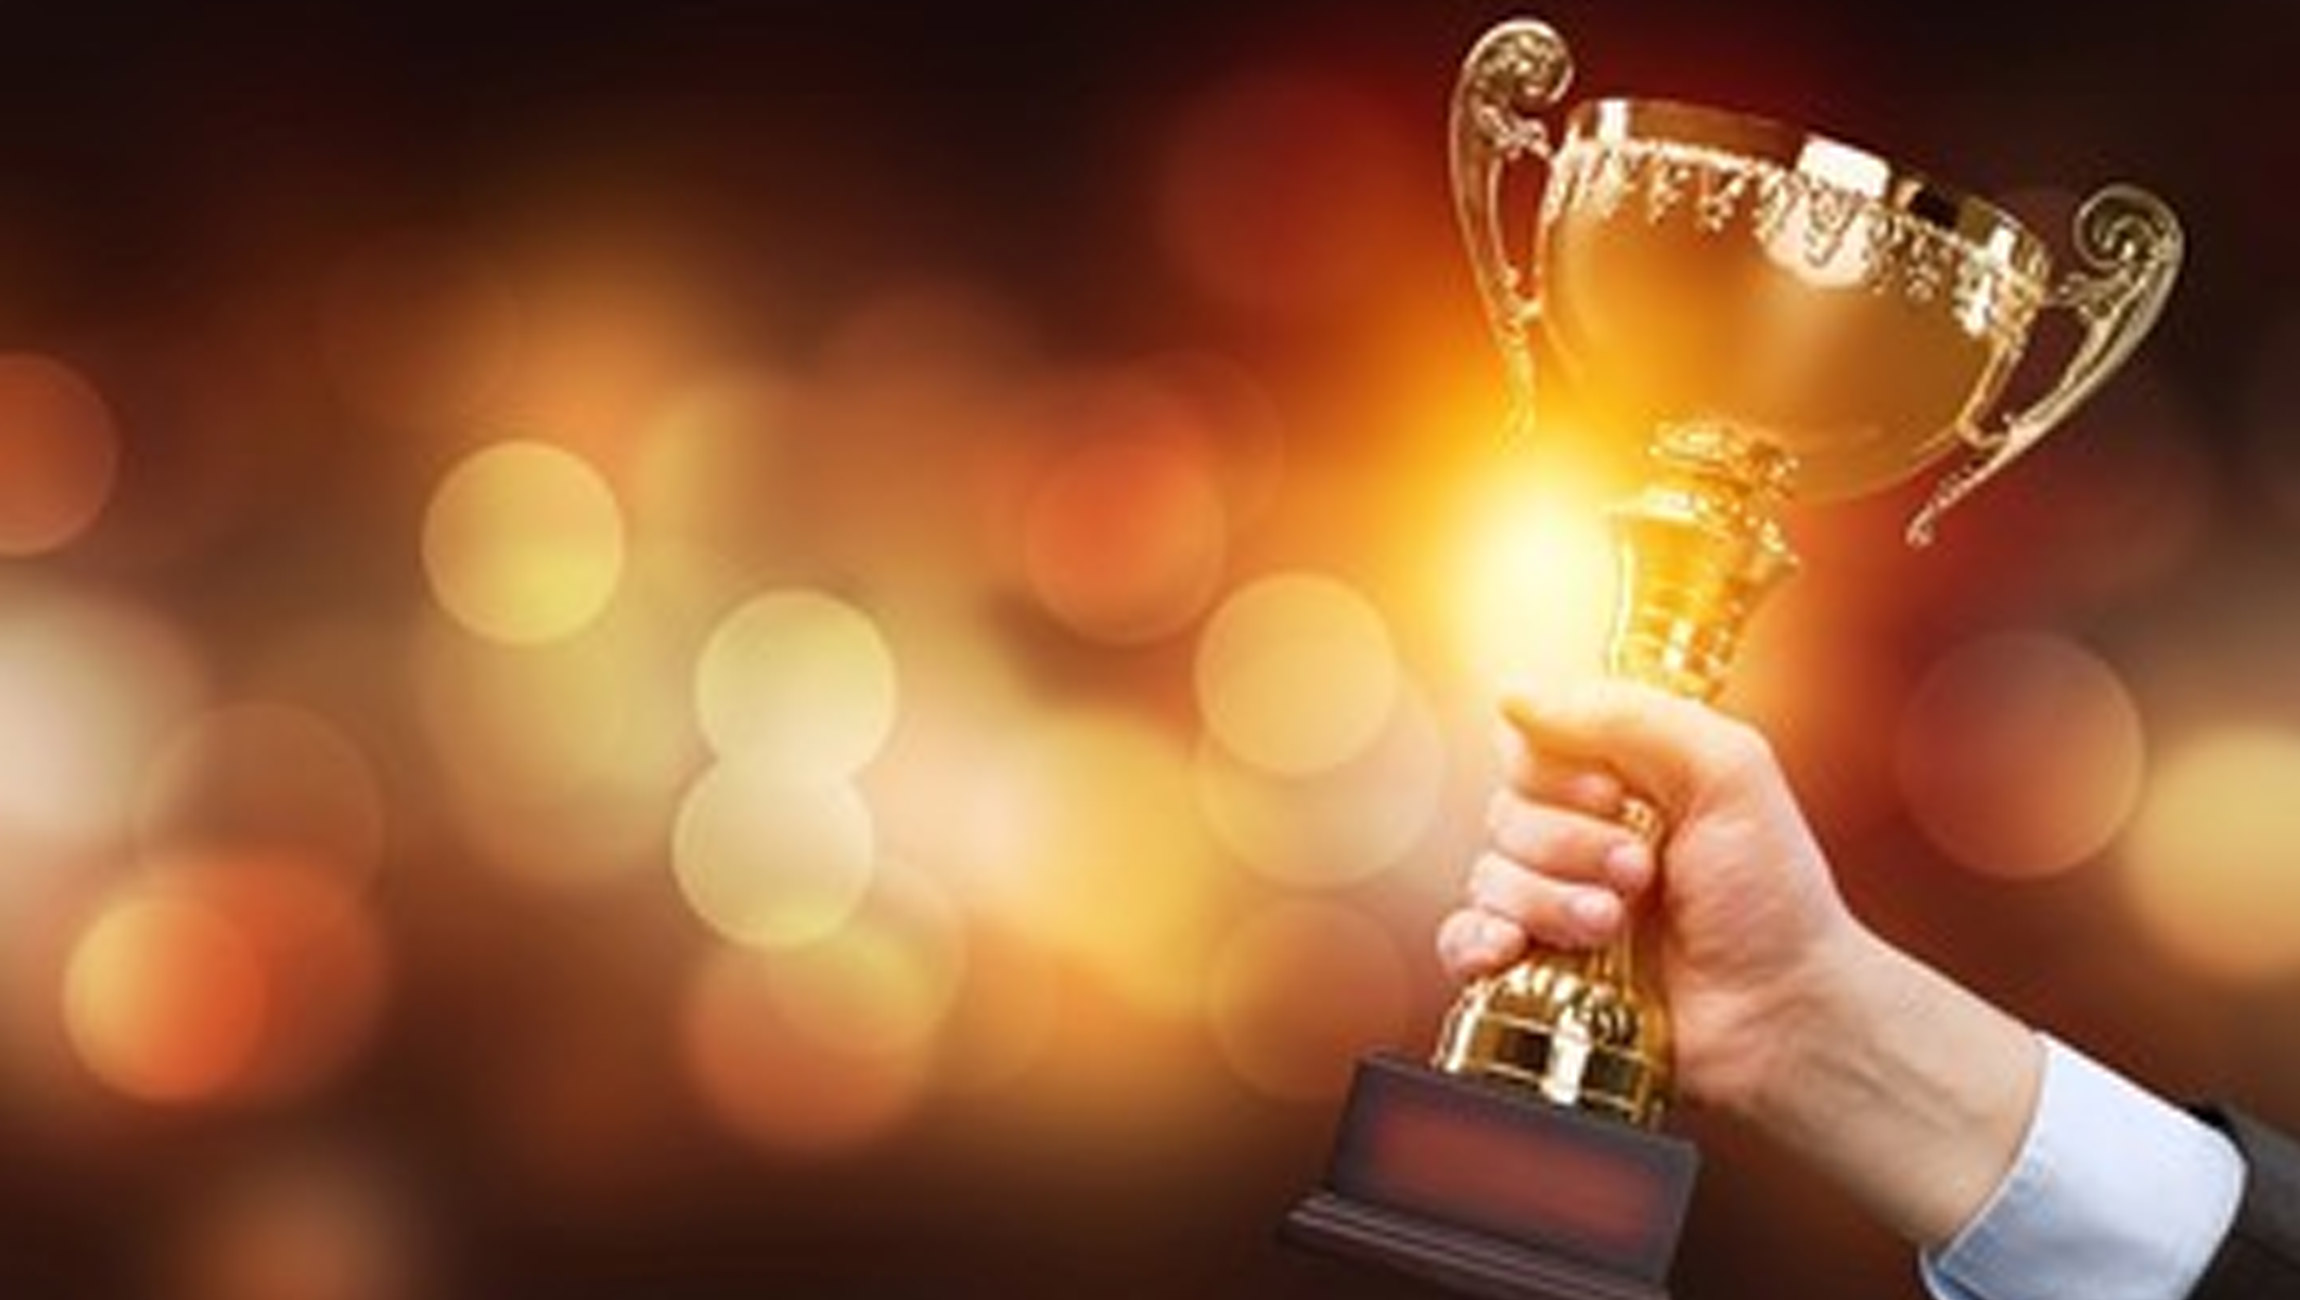 Searchspring’s Annual Partner Awards Honor Its Best-in-Class Ecommerce Partners, Including Shopify+, CQL and More